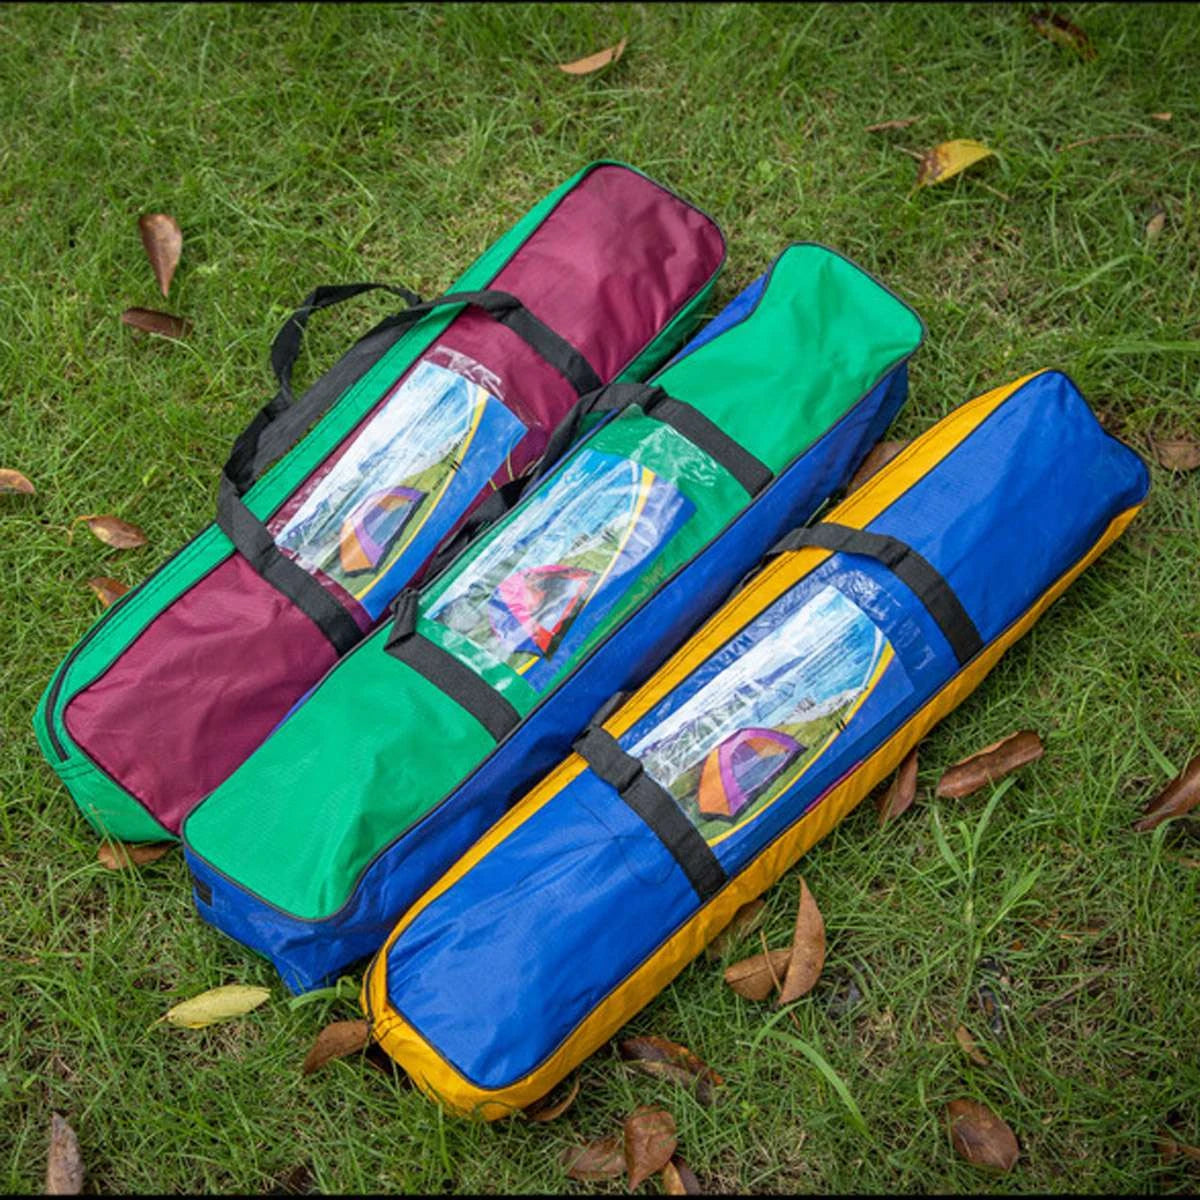 AUTOMATIC Water Proof Camping Tents With Carry Bag, Portable AUTOMATIC Camping Tents Price in Pakistan